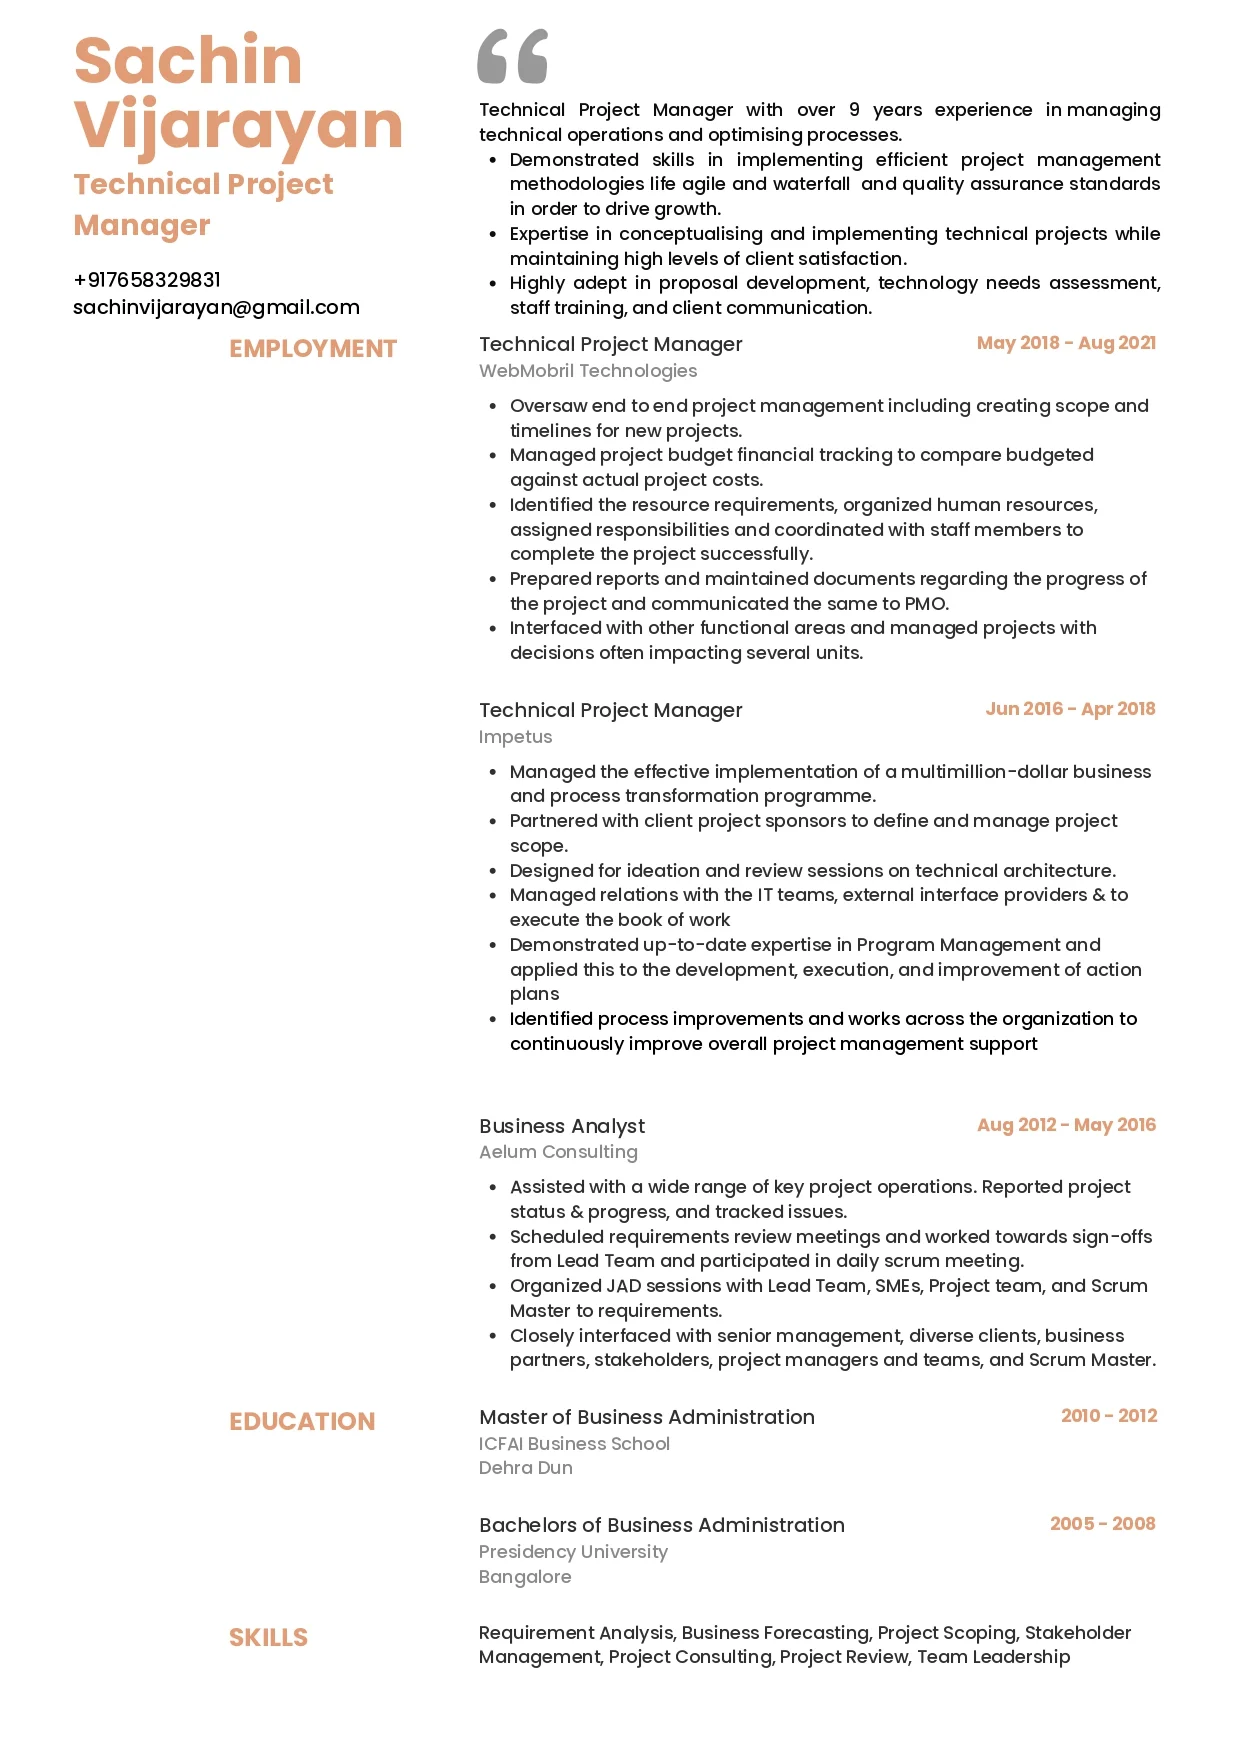 Sample Resume of Technical Project Manager | Free Resume Templates & Samples on Resumod.co